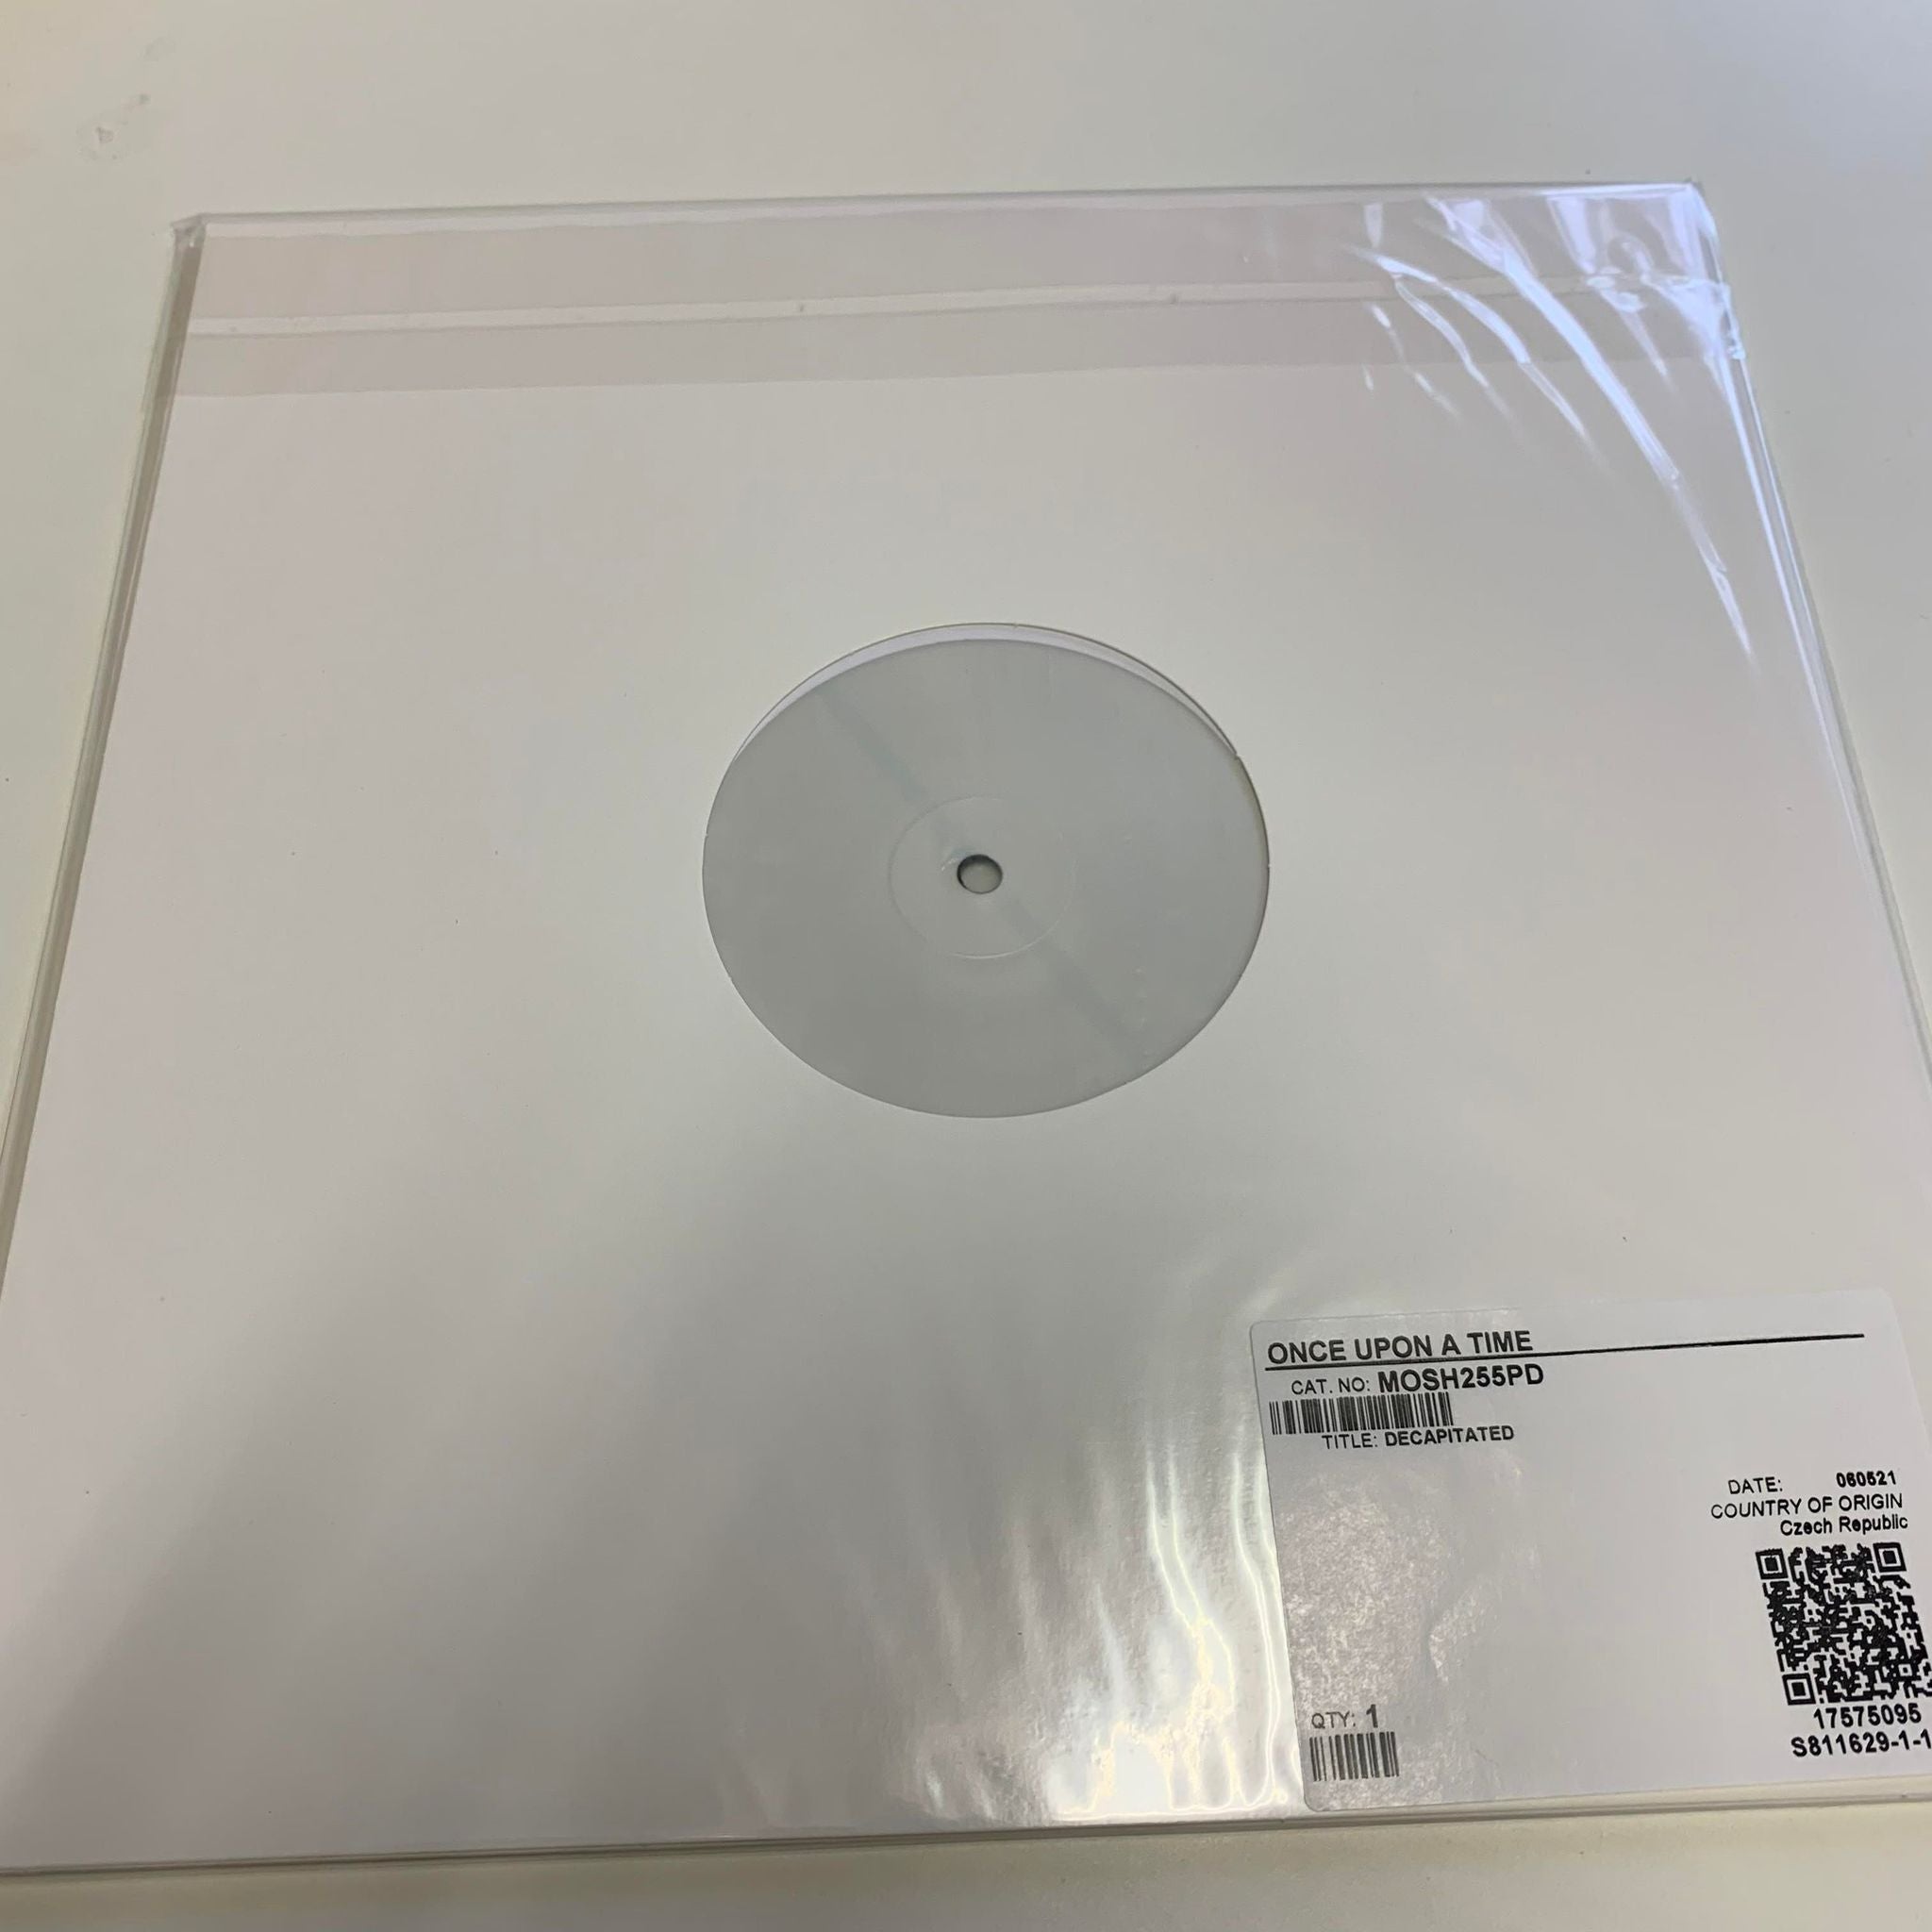 Decapitated "Winds Of Creation" 2021 Test Pressing Vinyl (Ltd to 9 Copies)